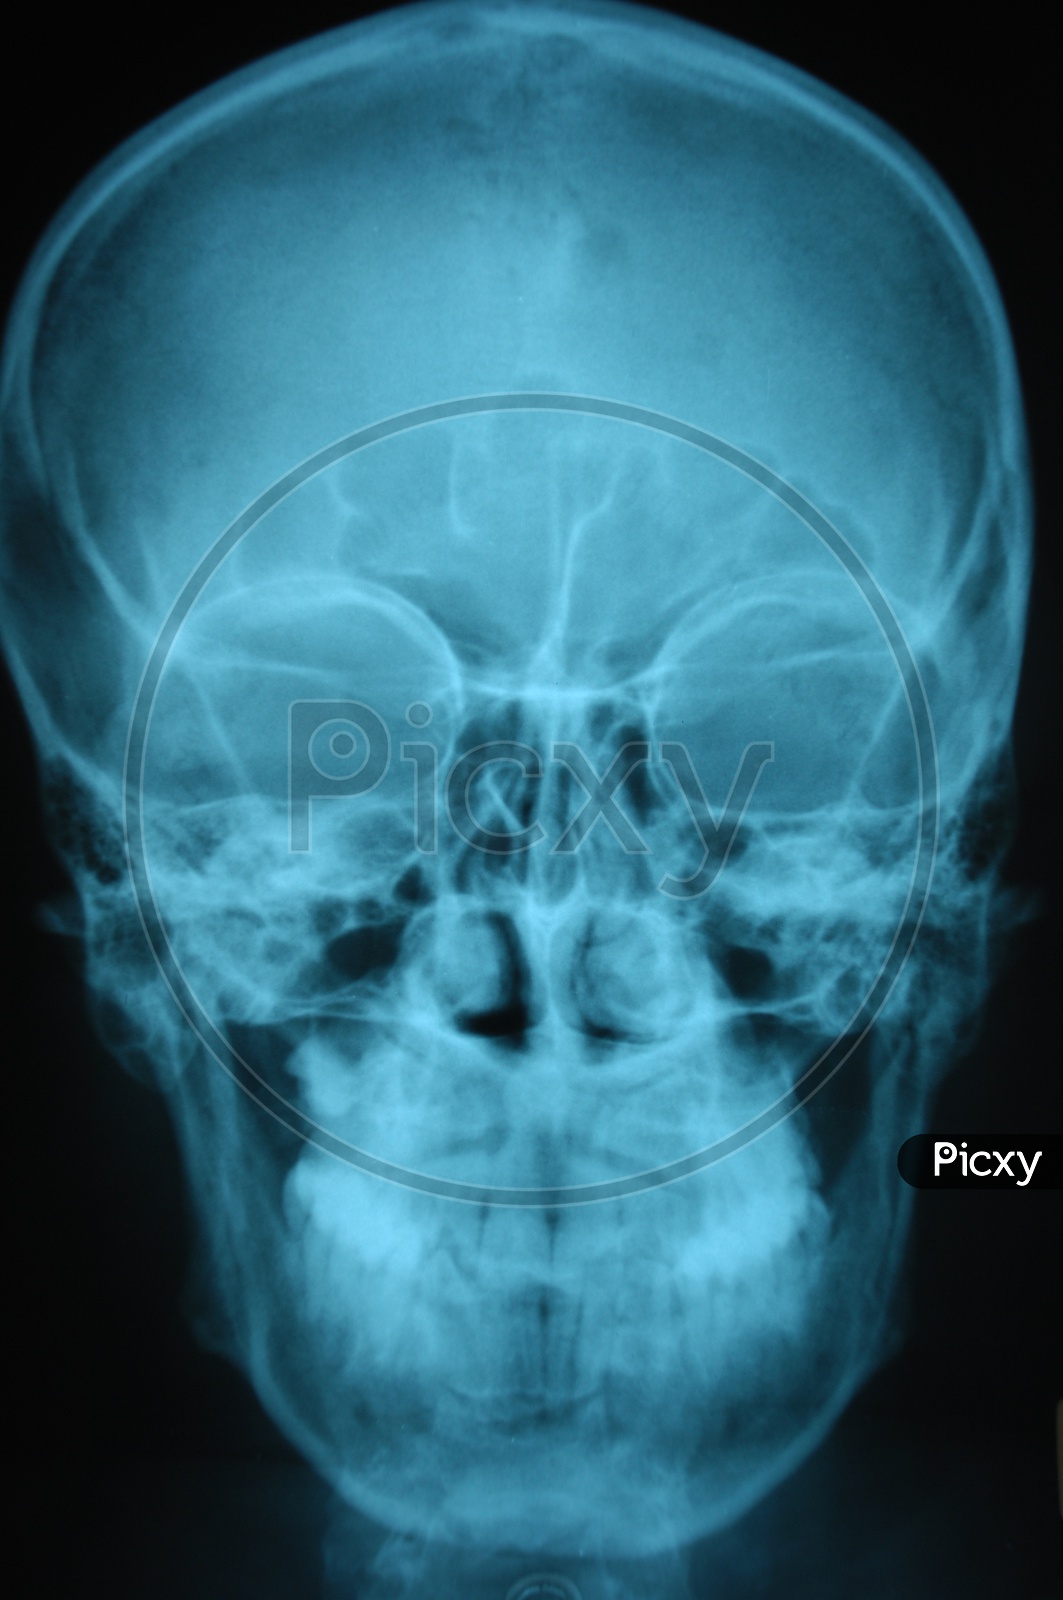 X-ray with a skeleton of a human head